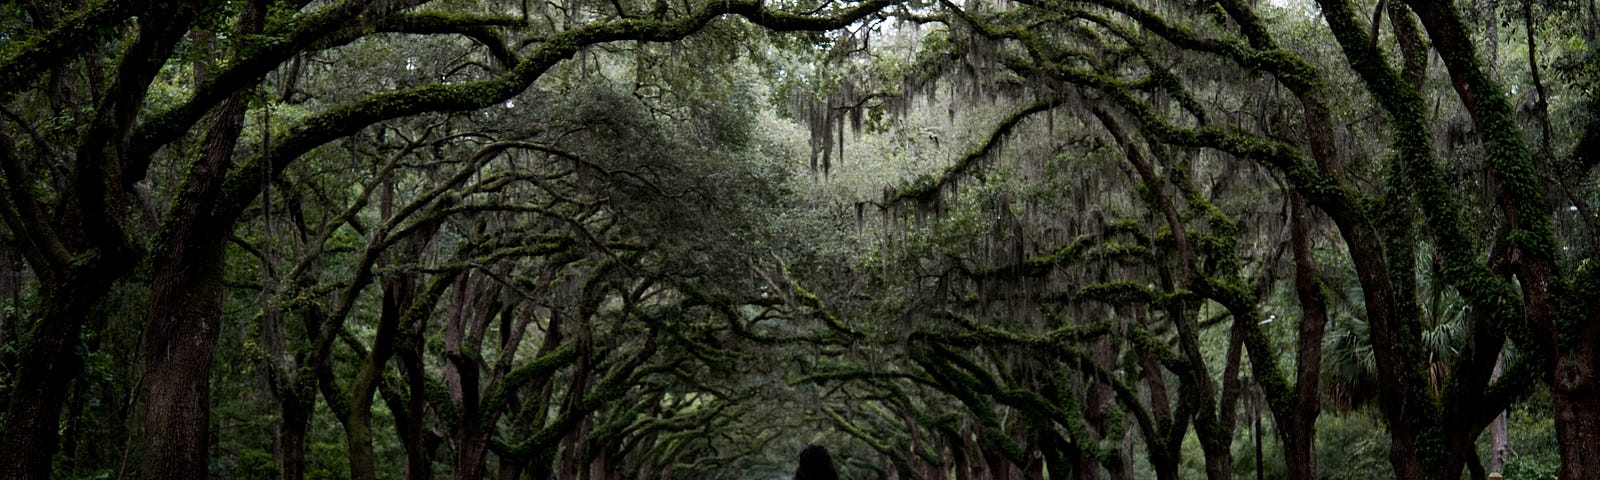 A woman in a black dress walks away from the camera through a path in a forest lined with gnarled trees.